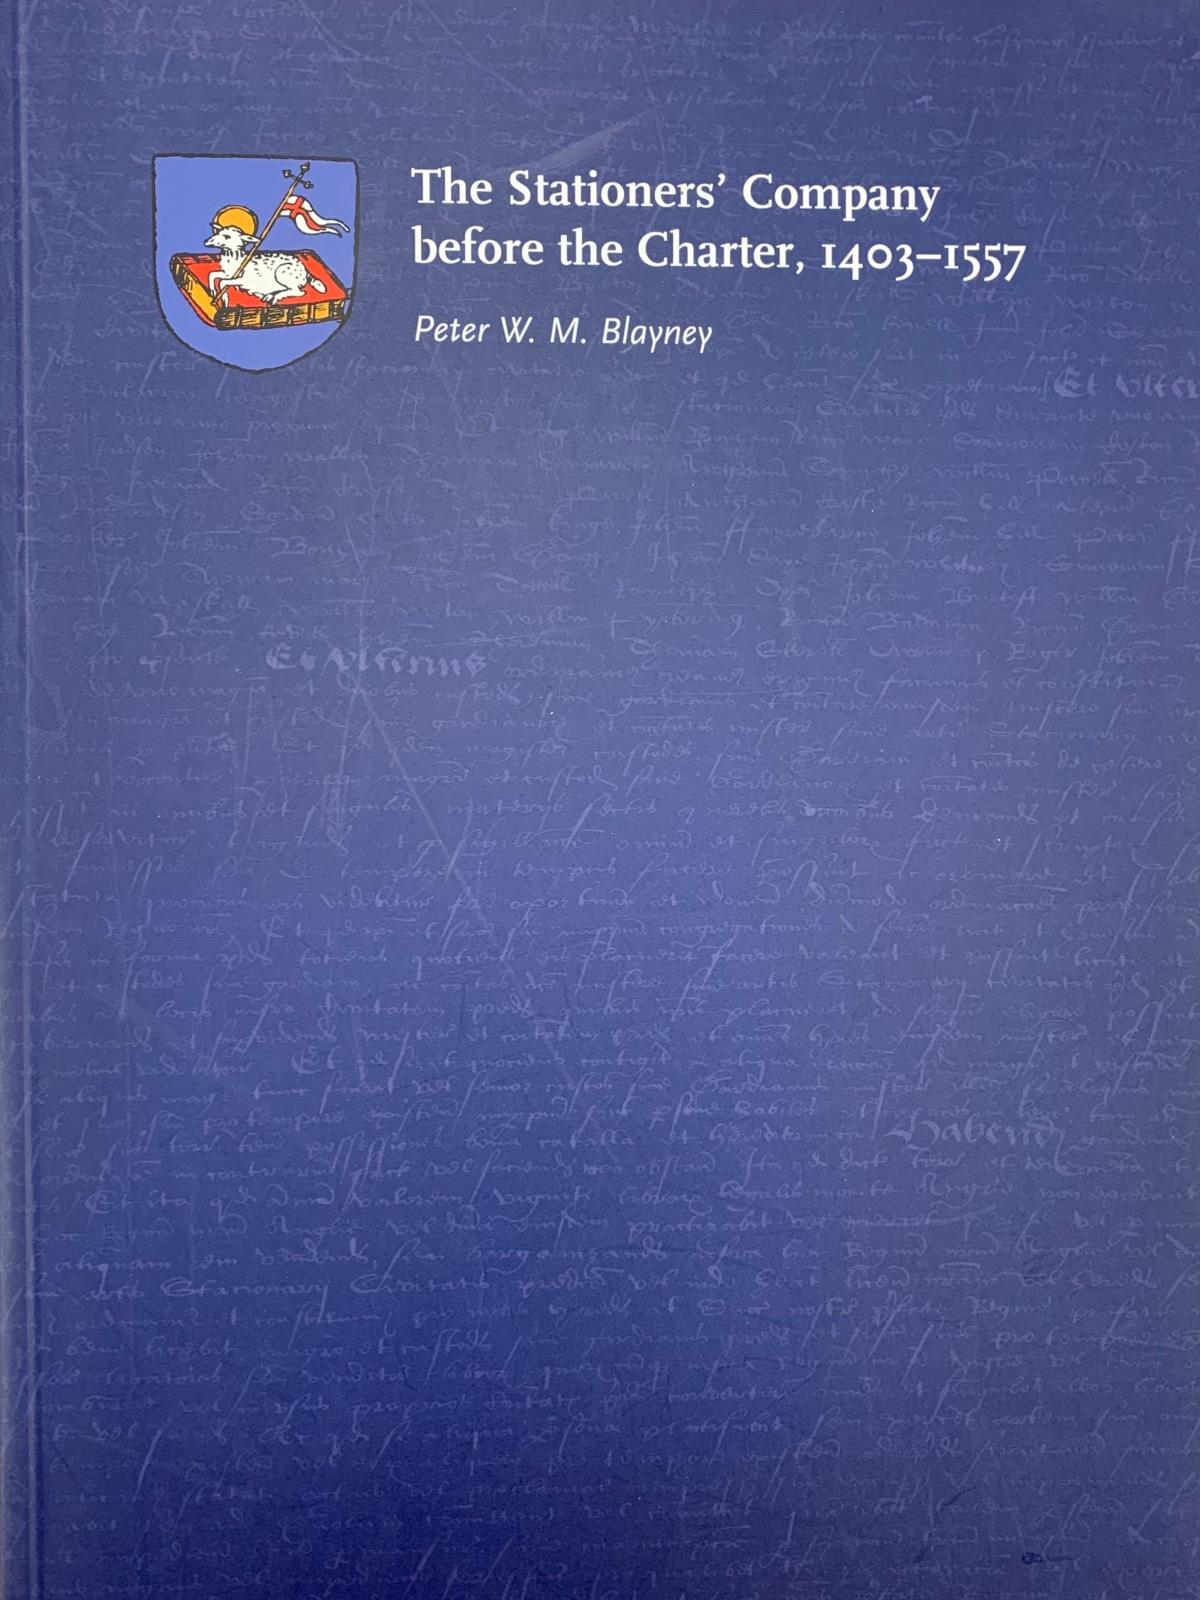 The Company before the Charter 1403-1557 by P Blayney